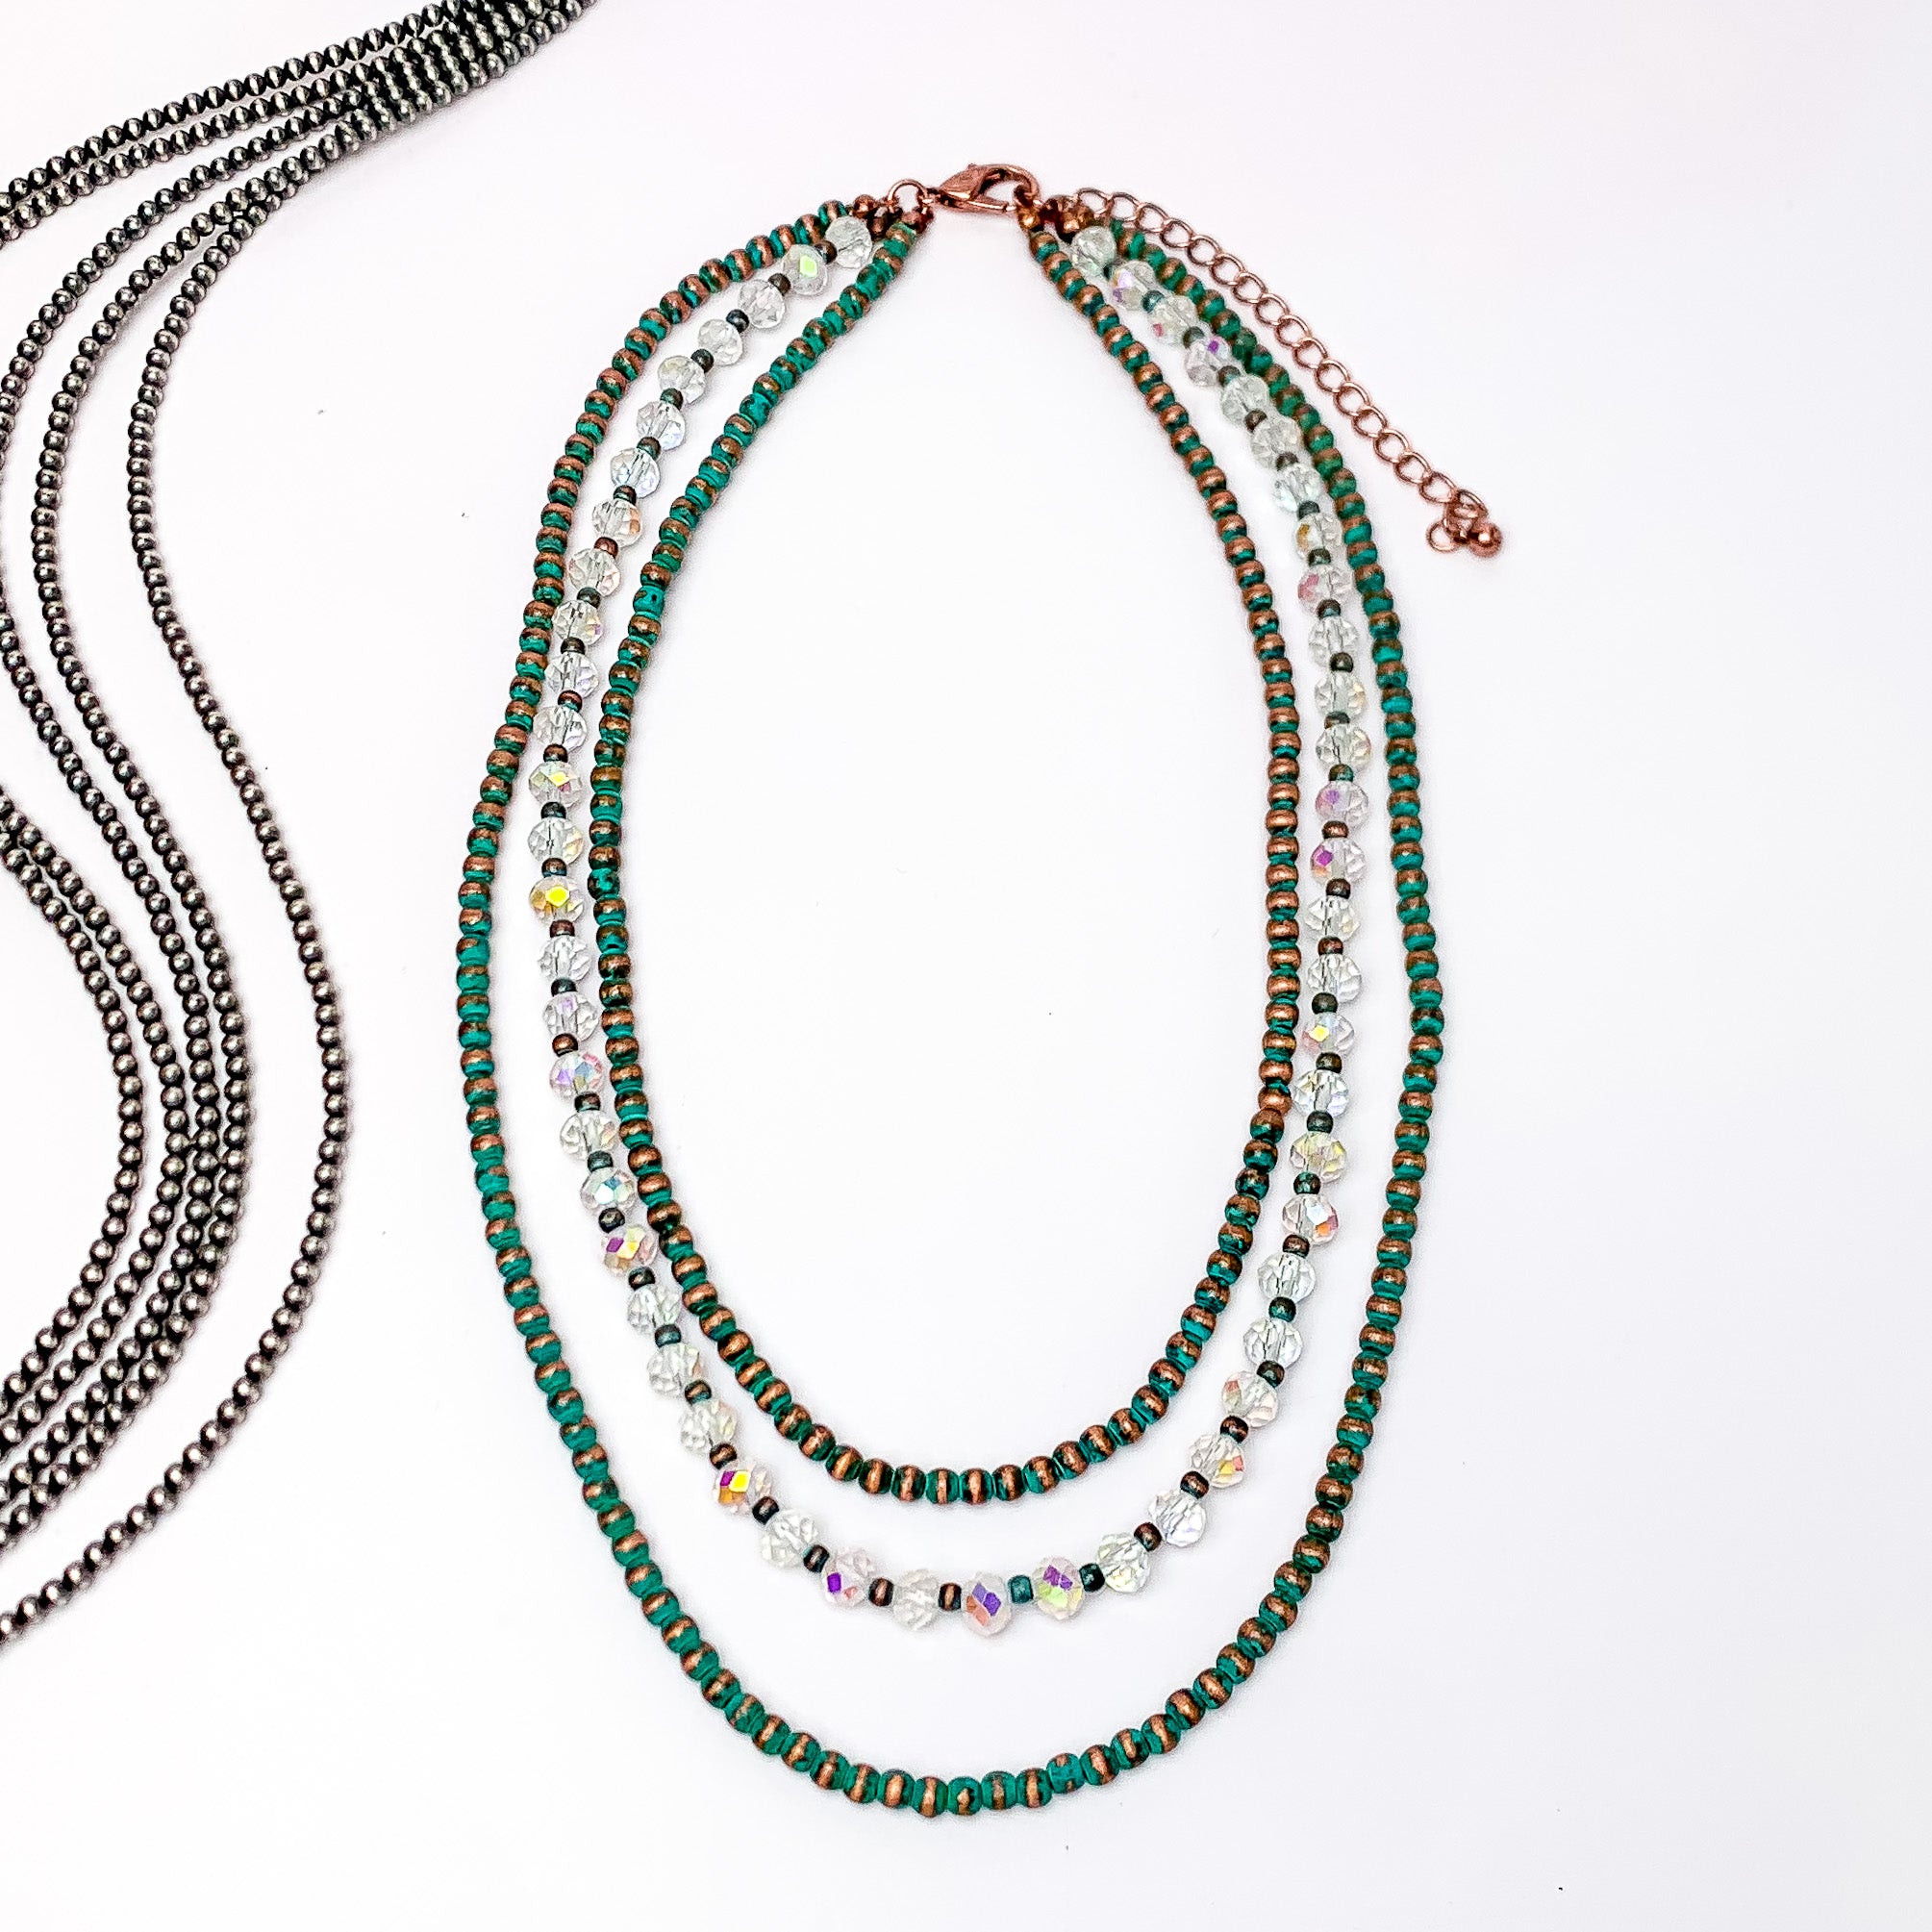 Wild Western Faux Navajo Three Strand Pearl Necklace in Patina Tone. Pictured on a white background with beads to the left for decoration